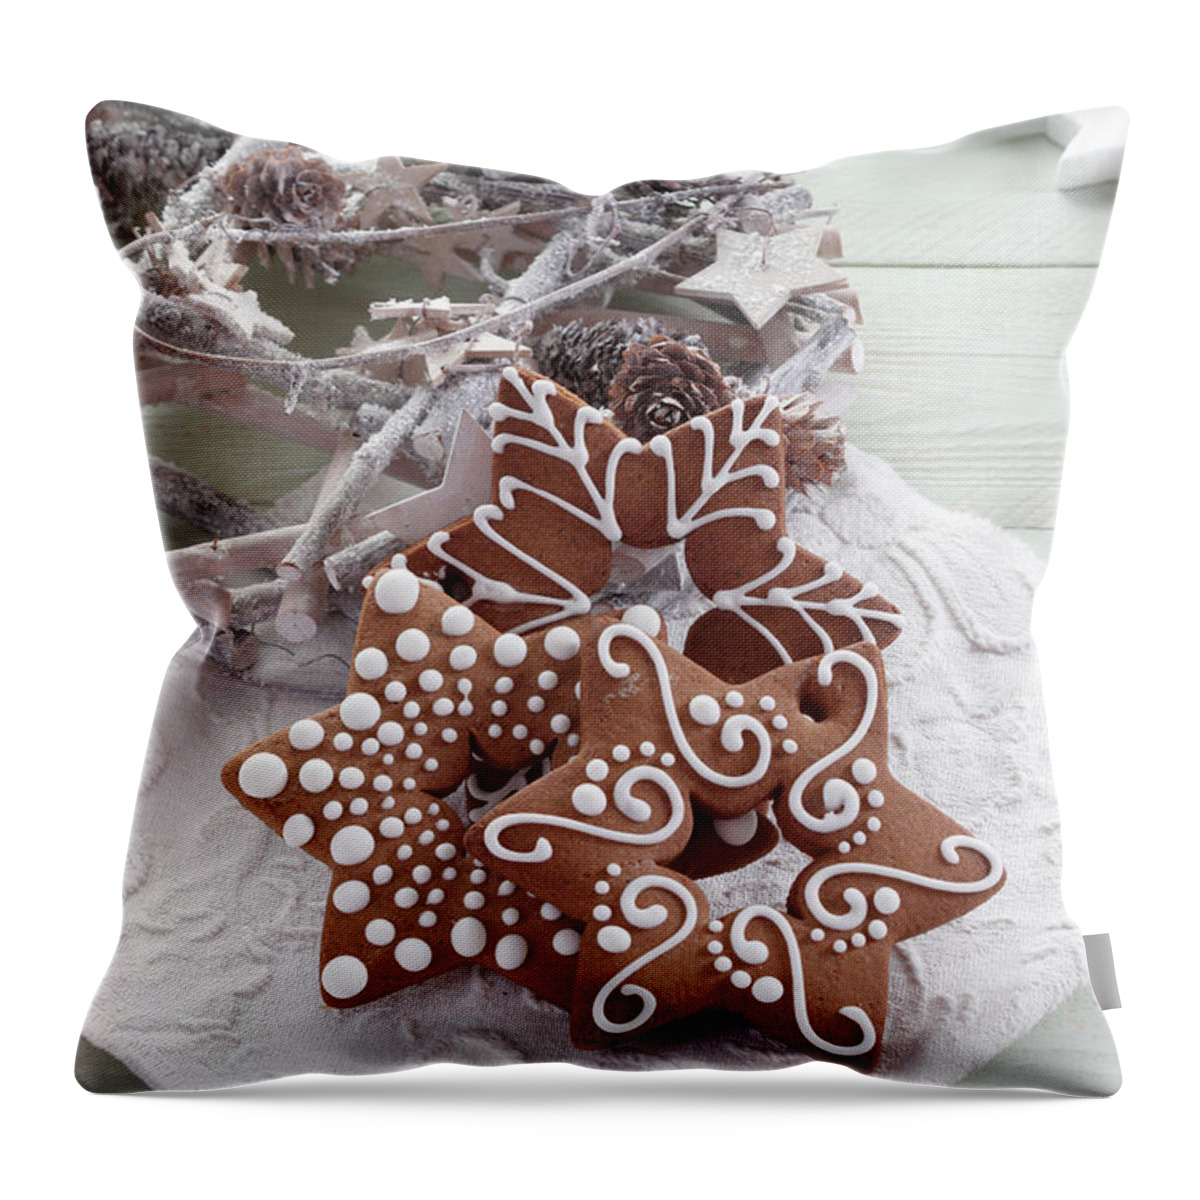 Christmas Gingerbread In The Shape Of A Star Throw Pillow by